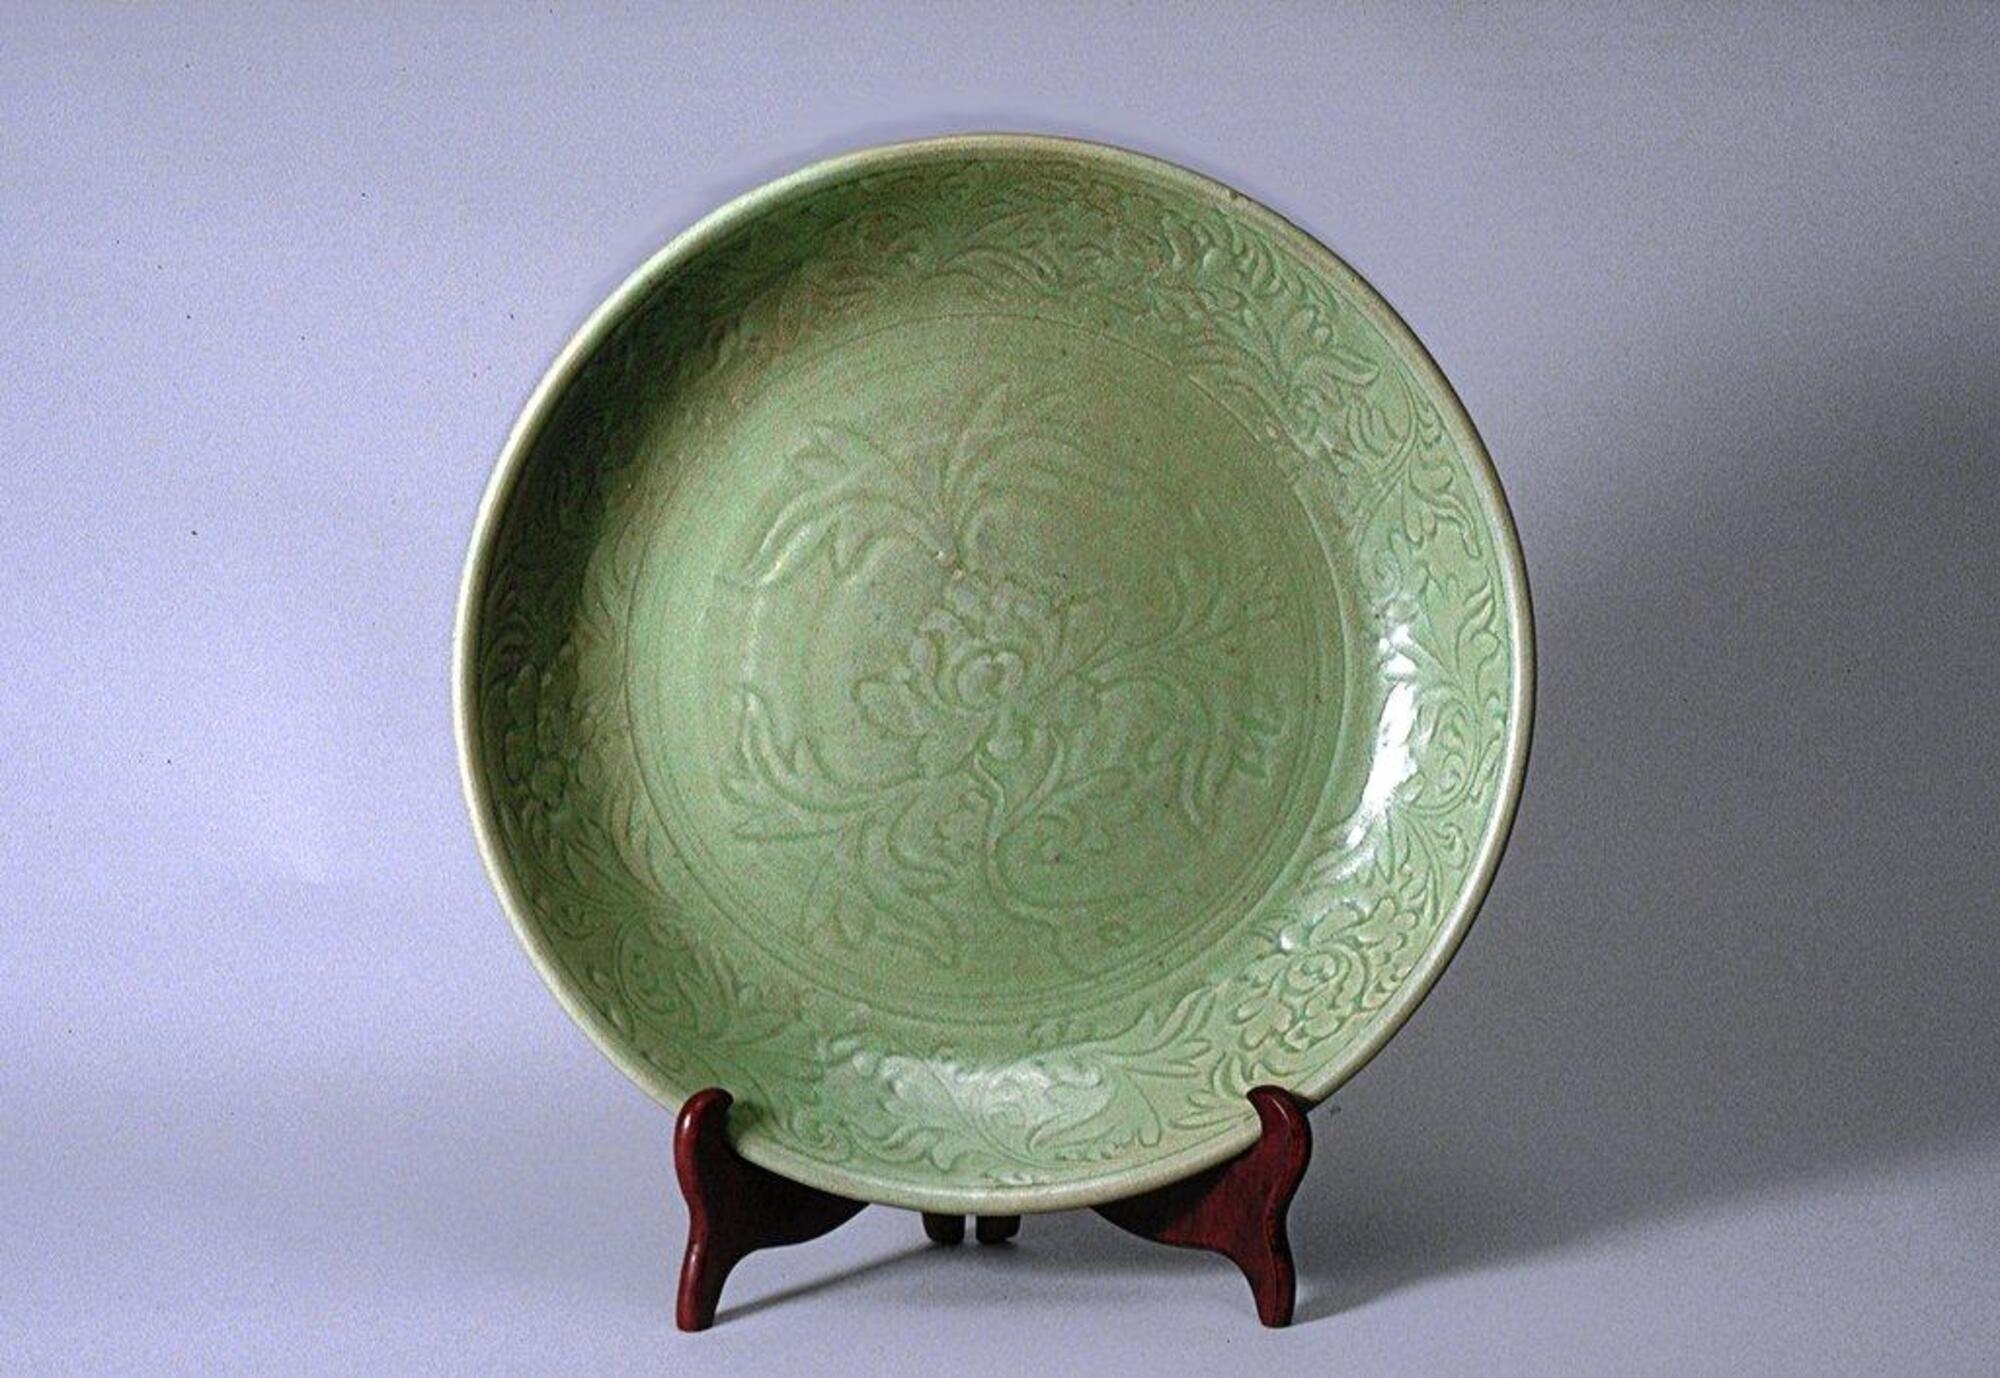 This large stoneware charger has a flat base on a foot ring and short, inverted, gently-curving sides with a direct rim. The interior is incised with a central peony motif surrounded by a floral meander border. It is covered in a green celadon glaze.